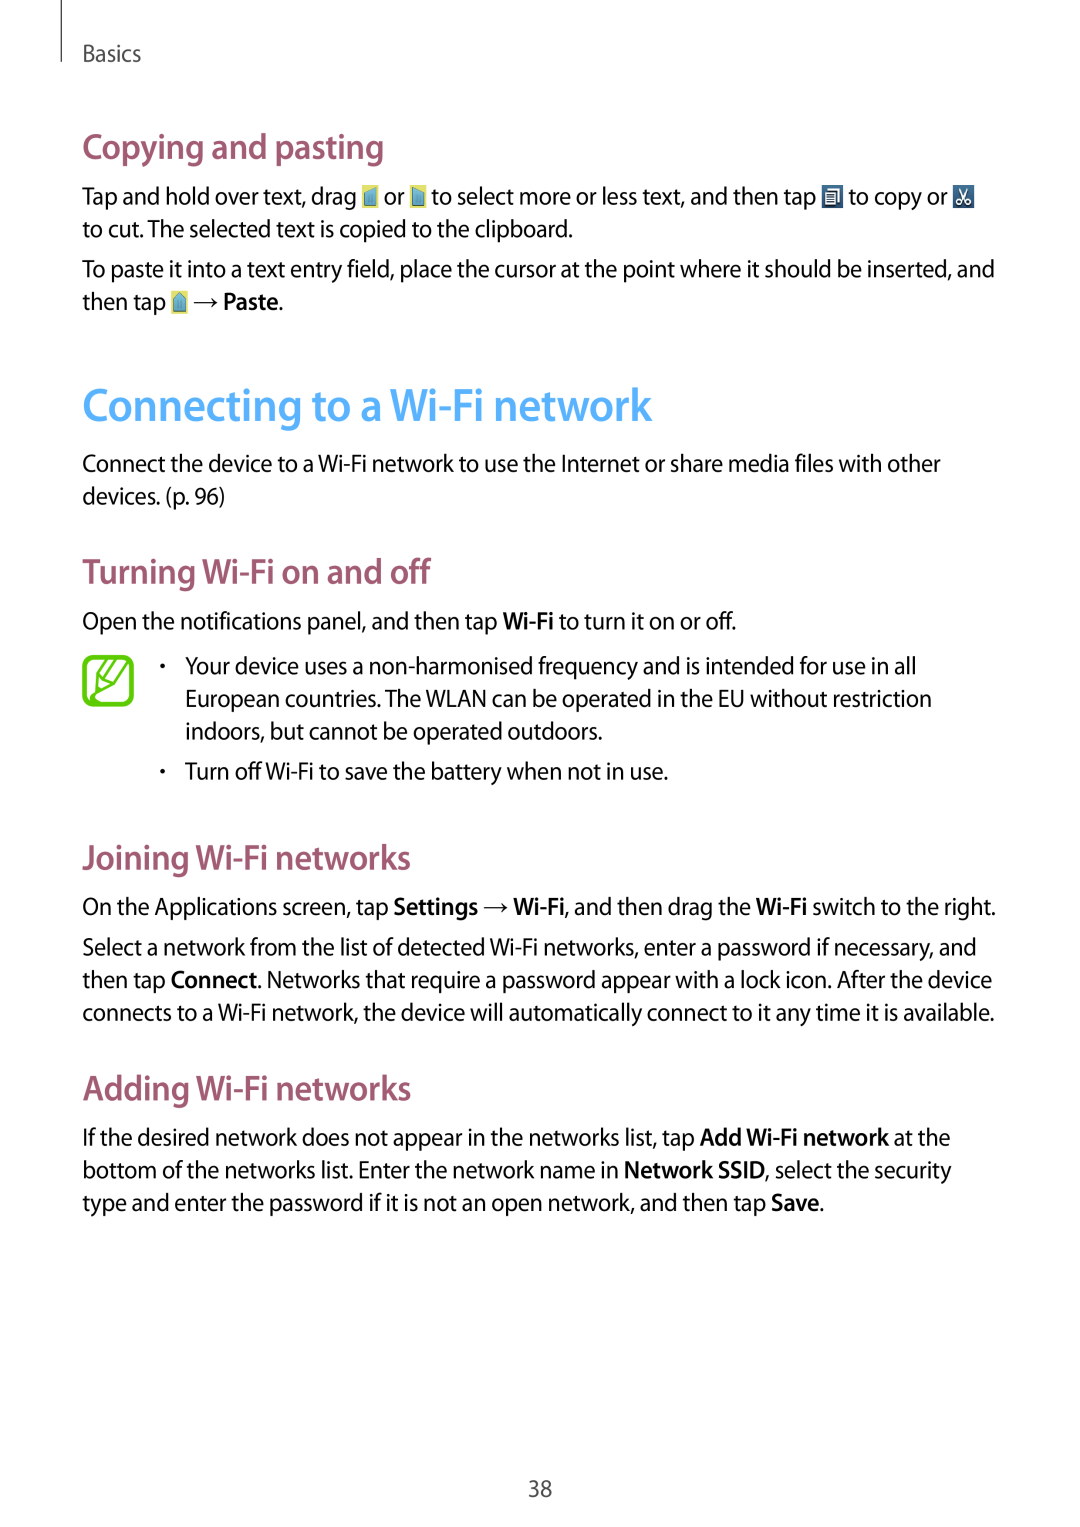 Samsung GT-I8190MBNETL Connecting to a Wi-Fi network, Copying and pasting, Turning Wi-Fi on and off, Adding Wi-Fi networks 